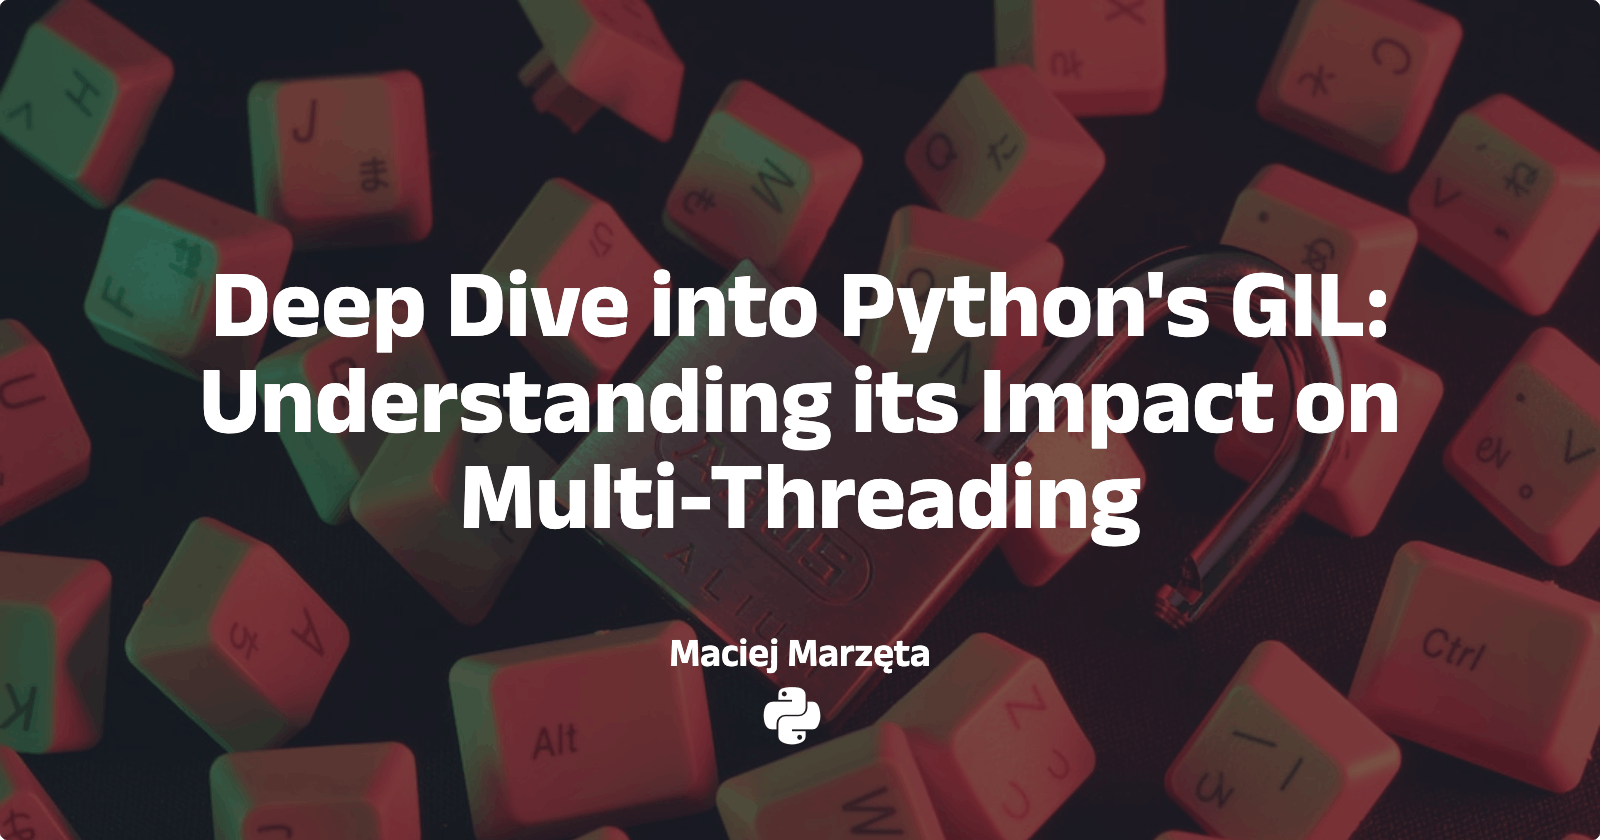 Deep Dive into Python's GIL: Understanding its Impact on Multi-Threading